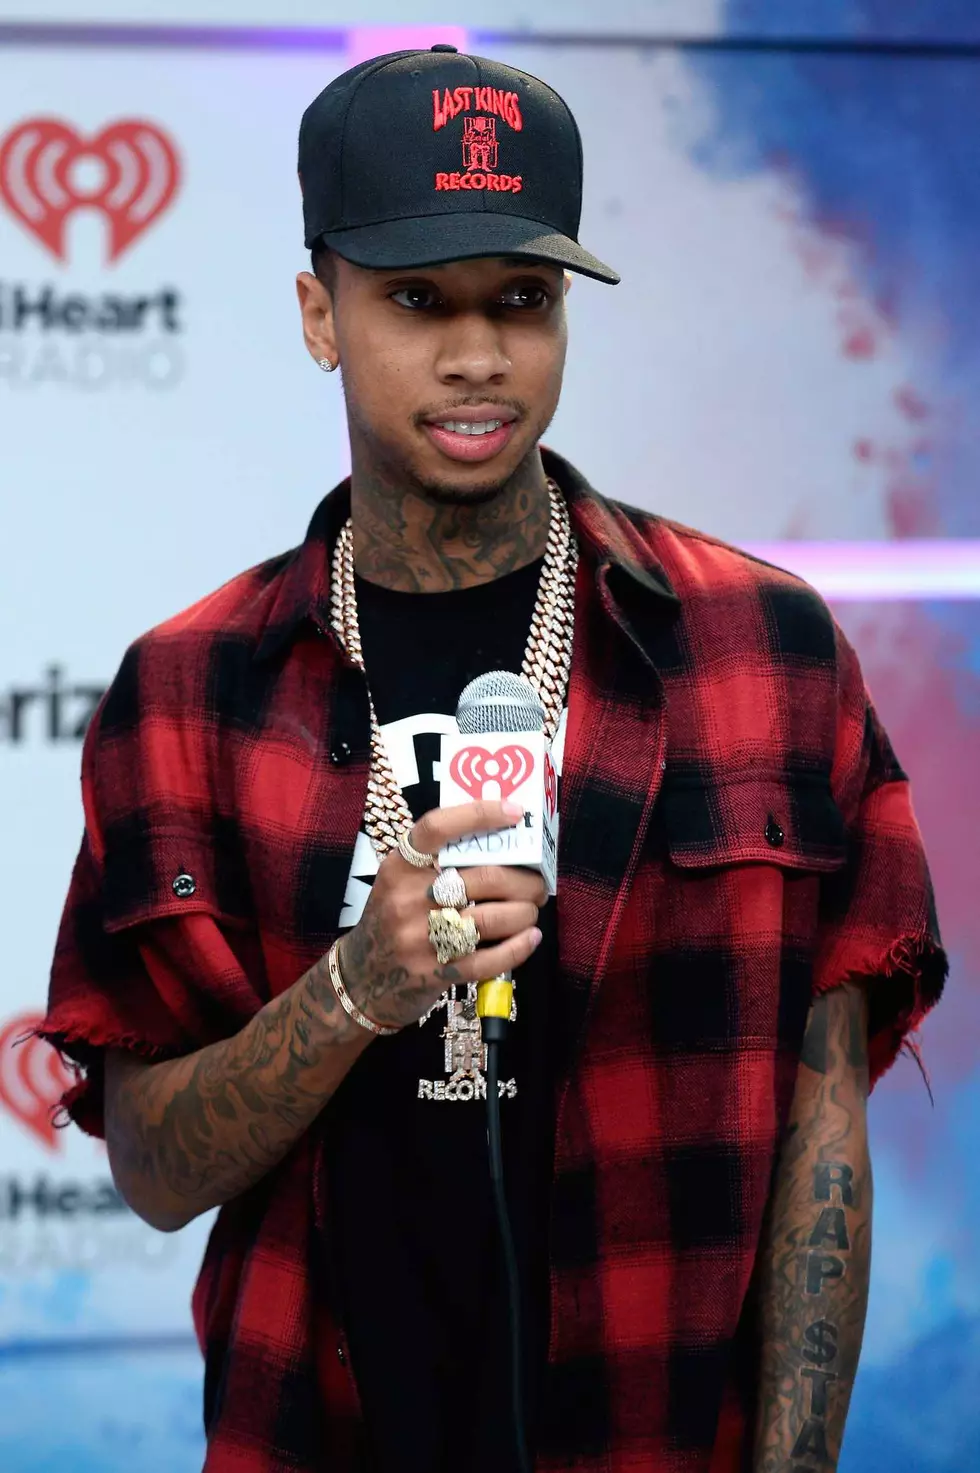 Tyga Says Drake and J. Cole Deserve 'Greatest' Recognition